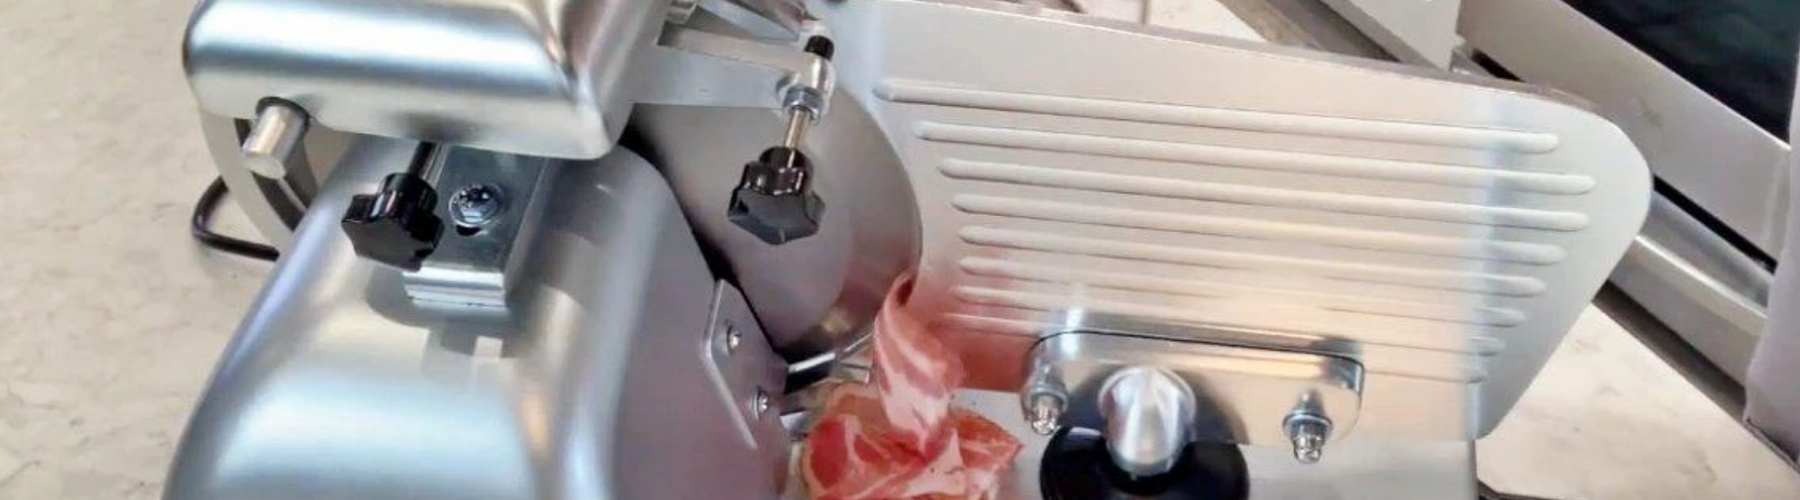 The Incredible Slicing Capability of the Gourmet ES Meat Slicers